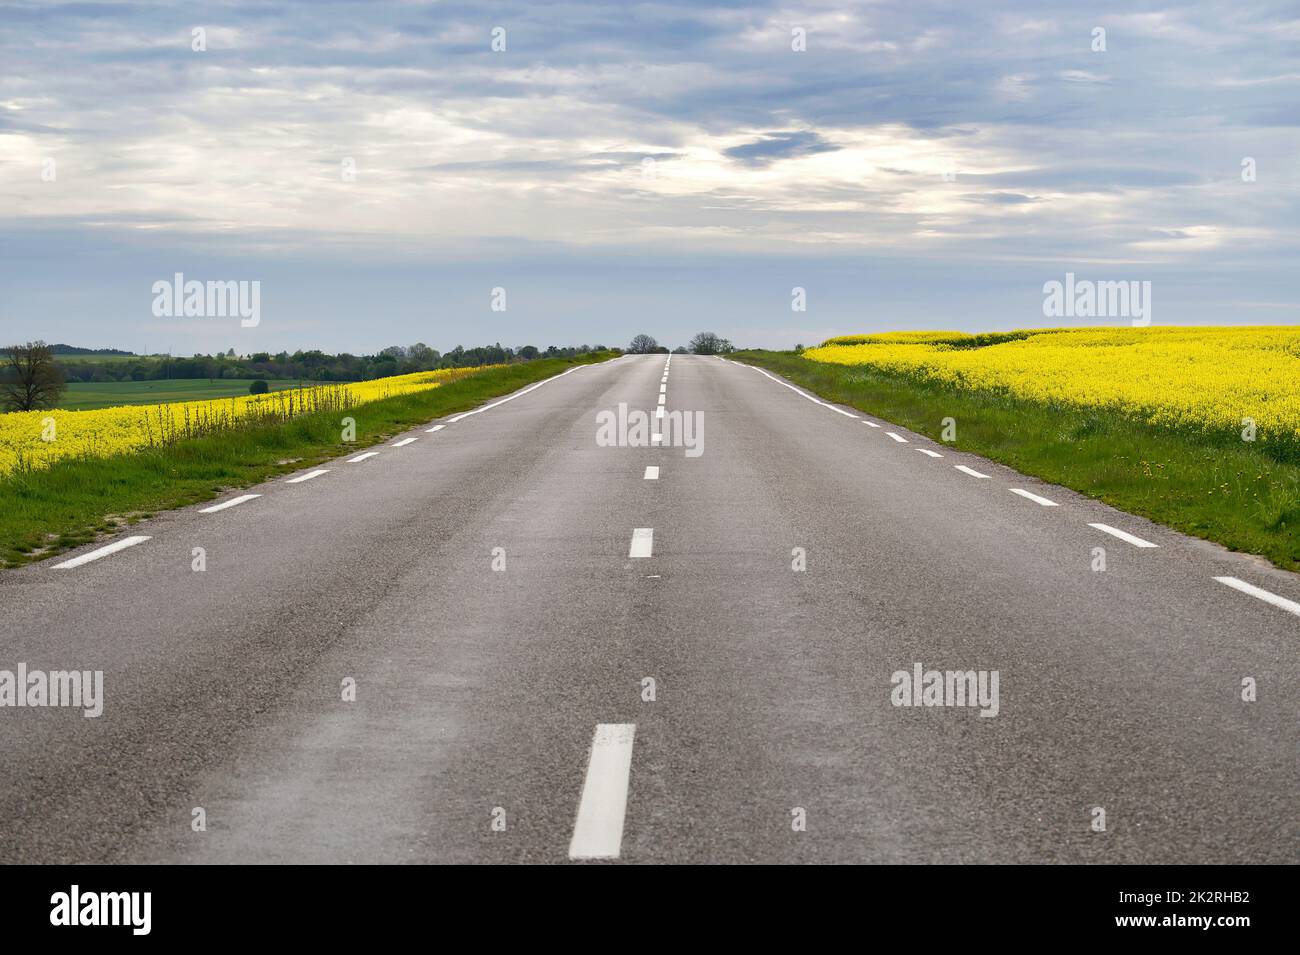 Road through picturesque countryside landscape Stock Photo